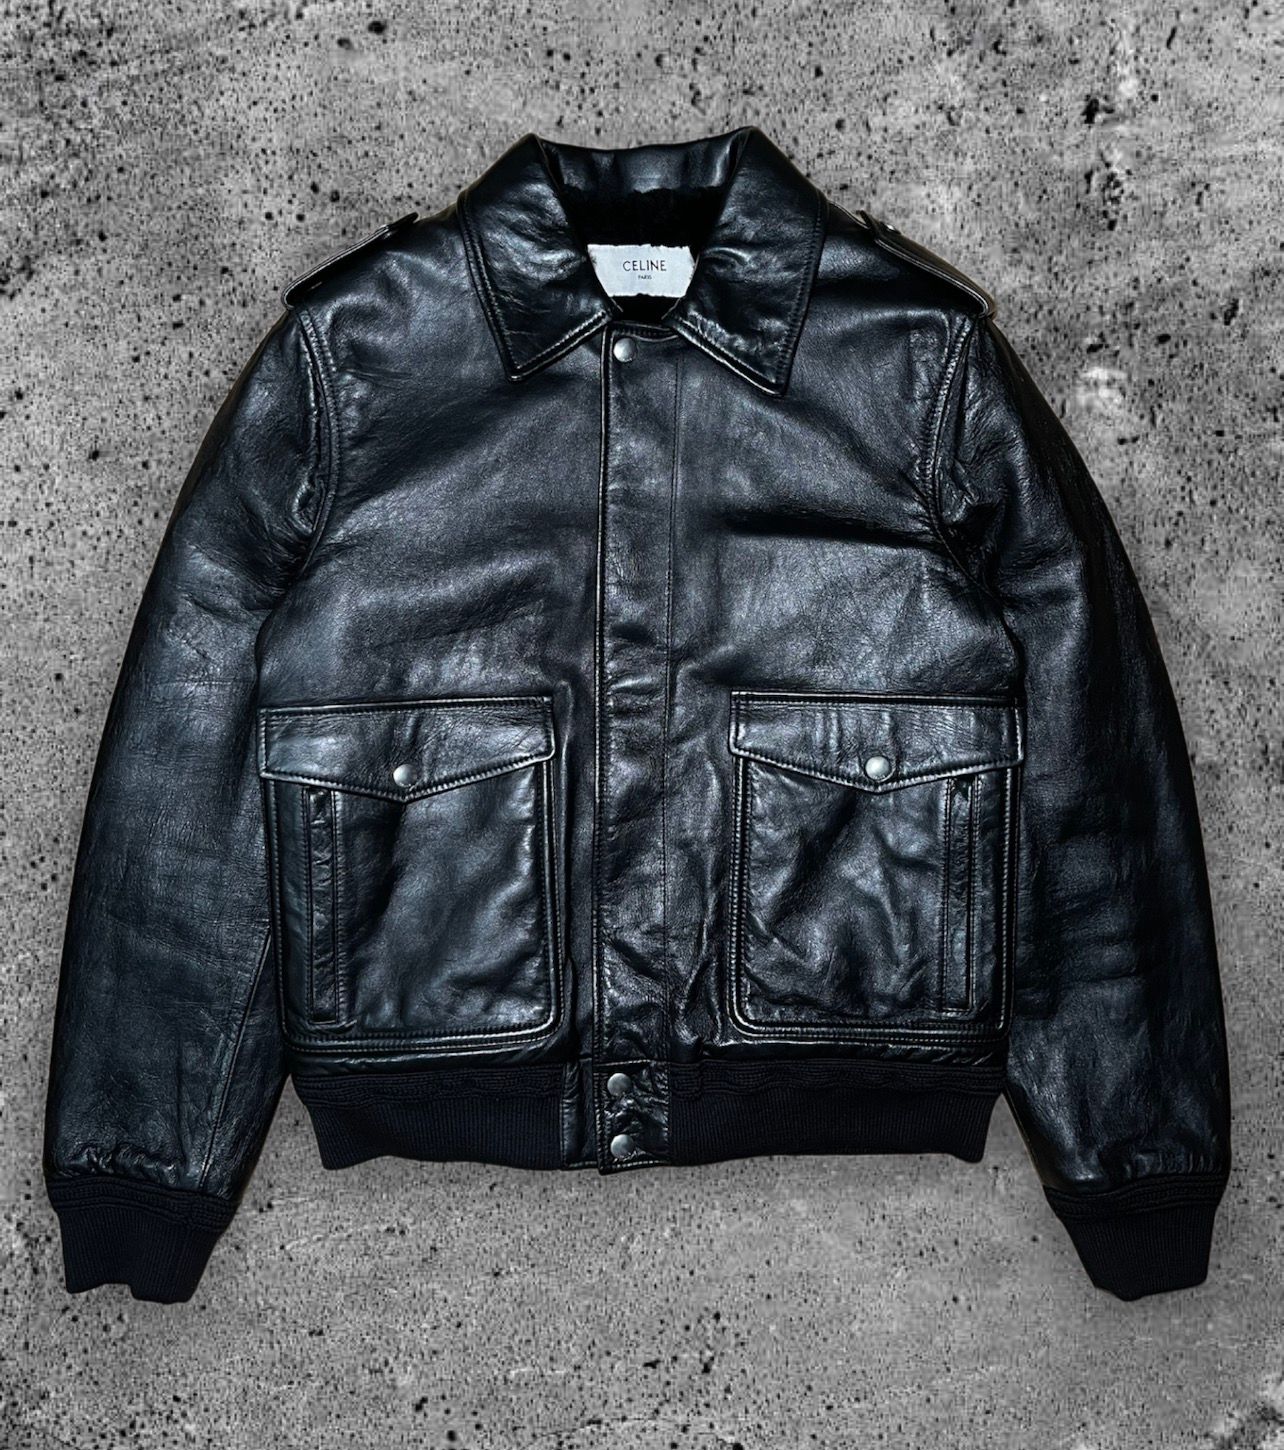 image of Celine By Hedi Slimane “Fw20 Aviator Leather Jacket” in Black, Men's (Size Small)